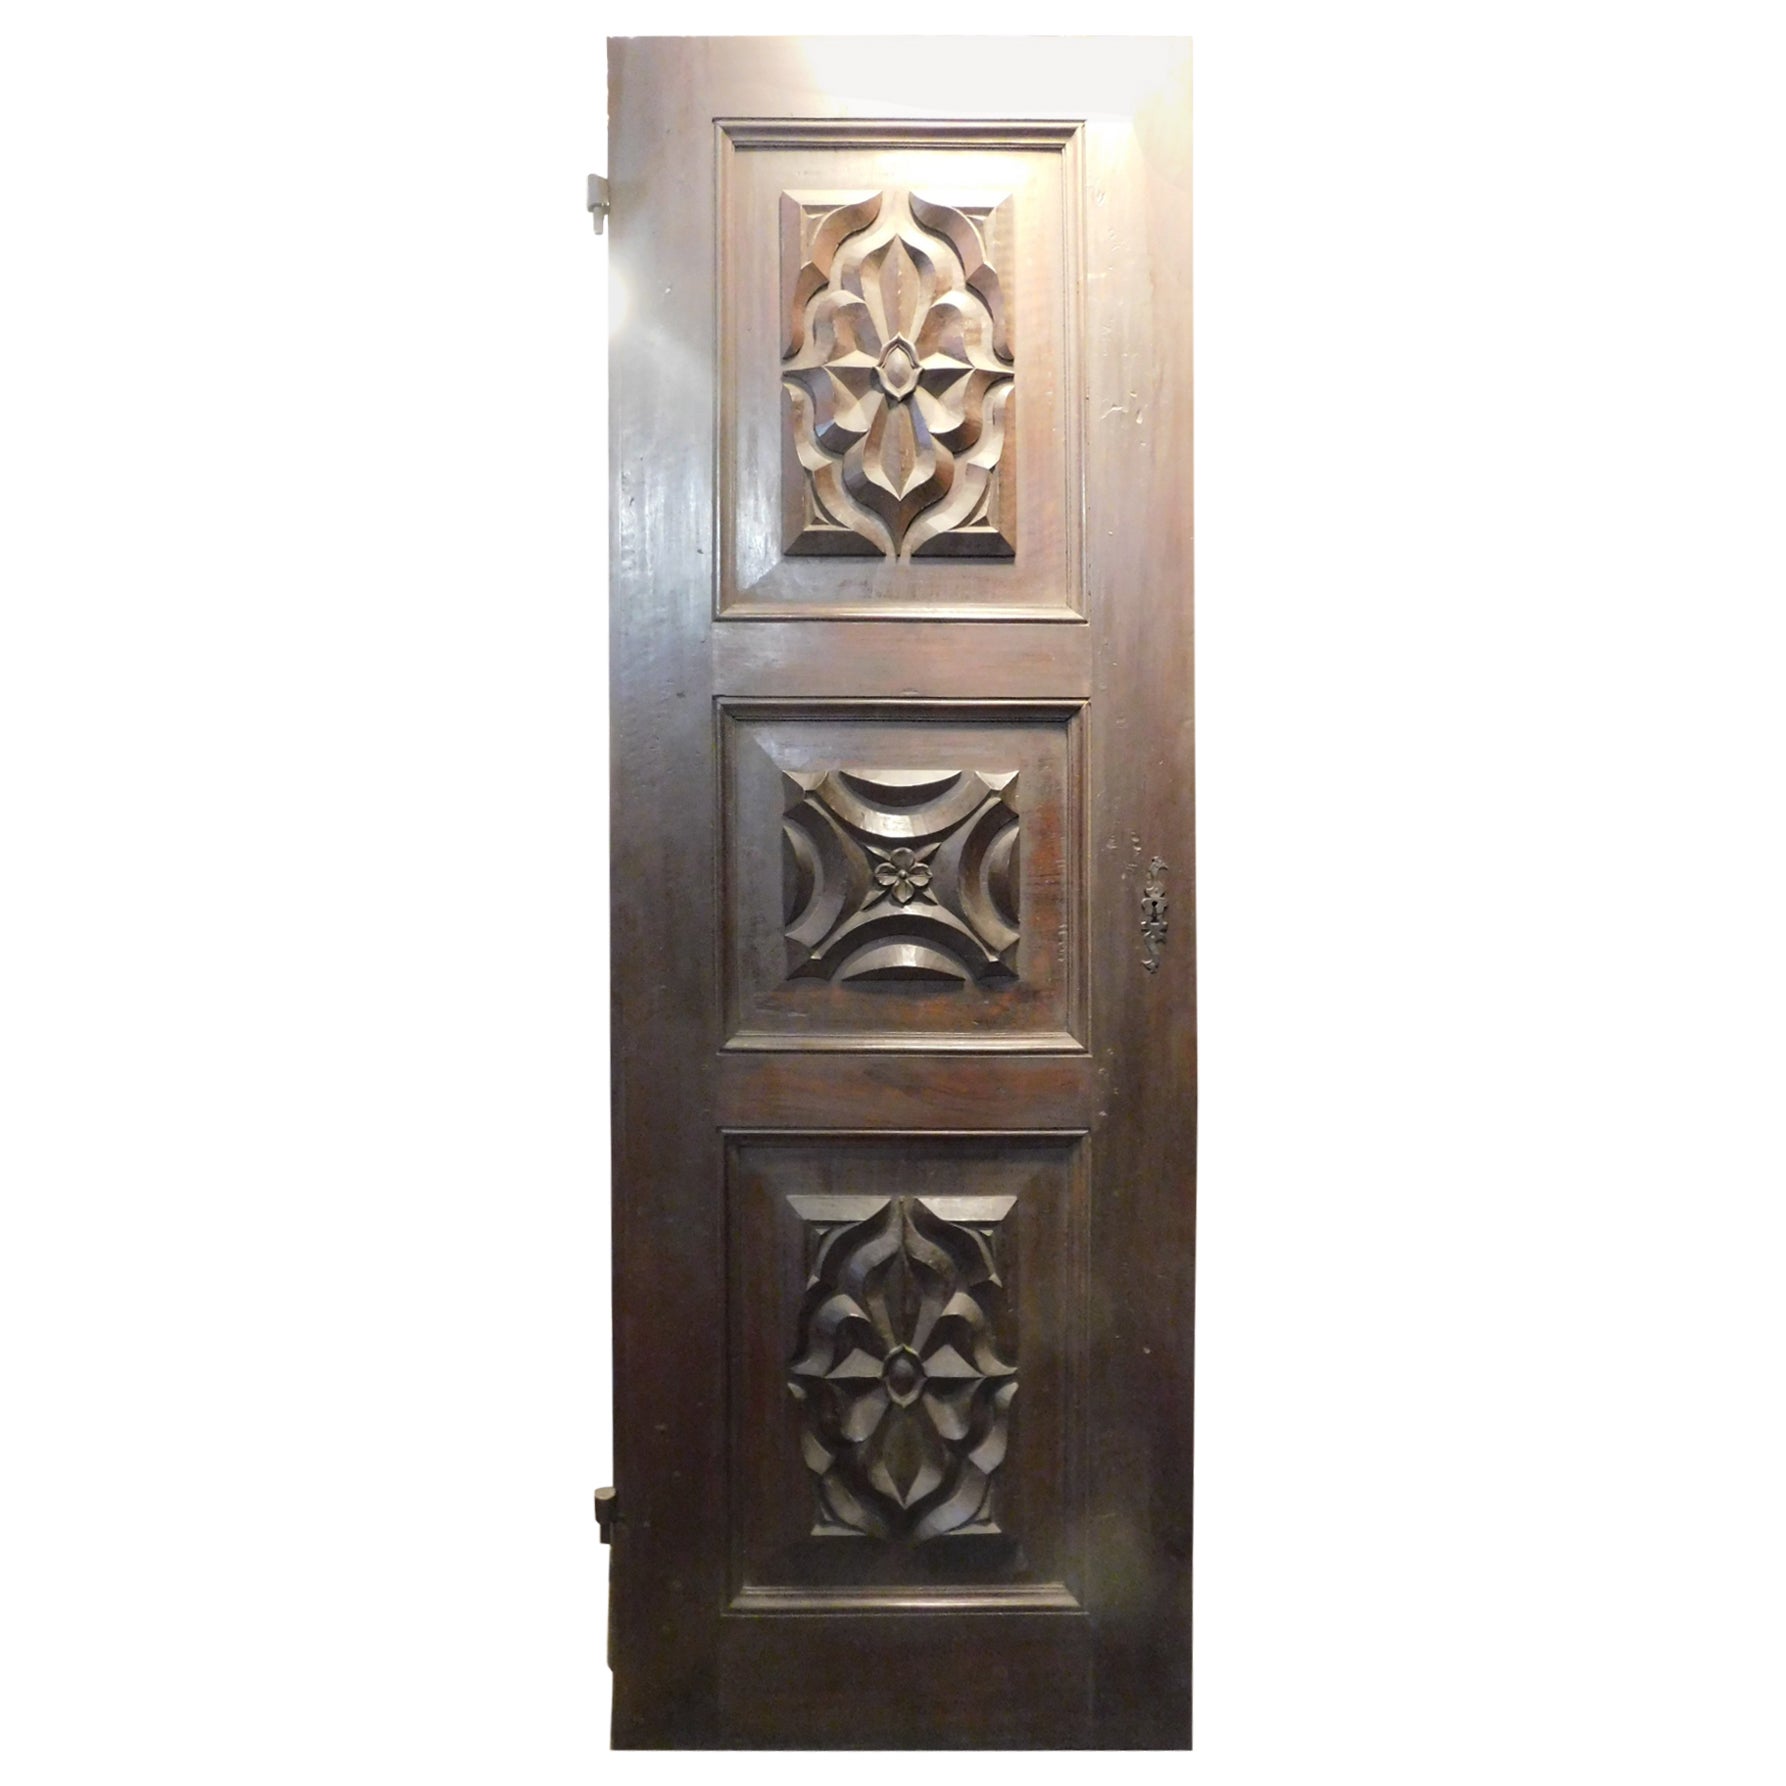 N.4 atique walnut doors, richly hand-carved, Italy